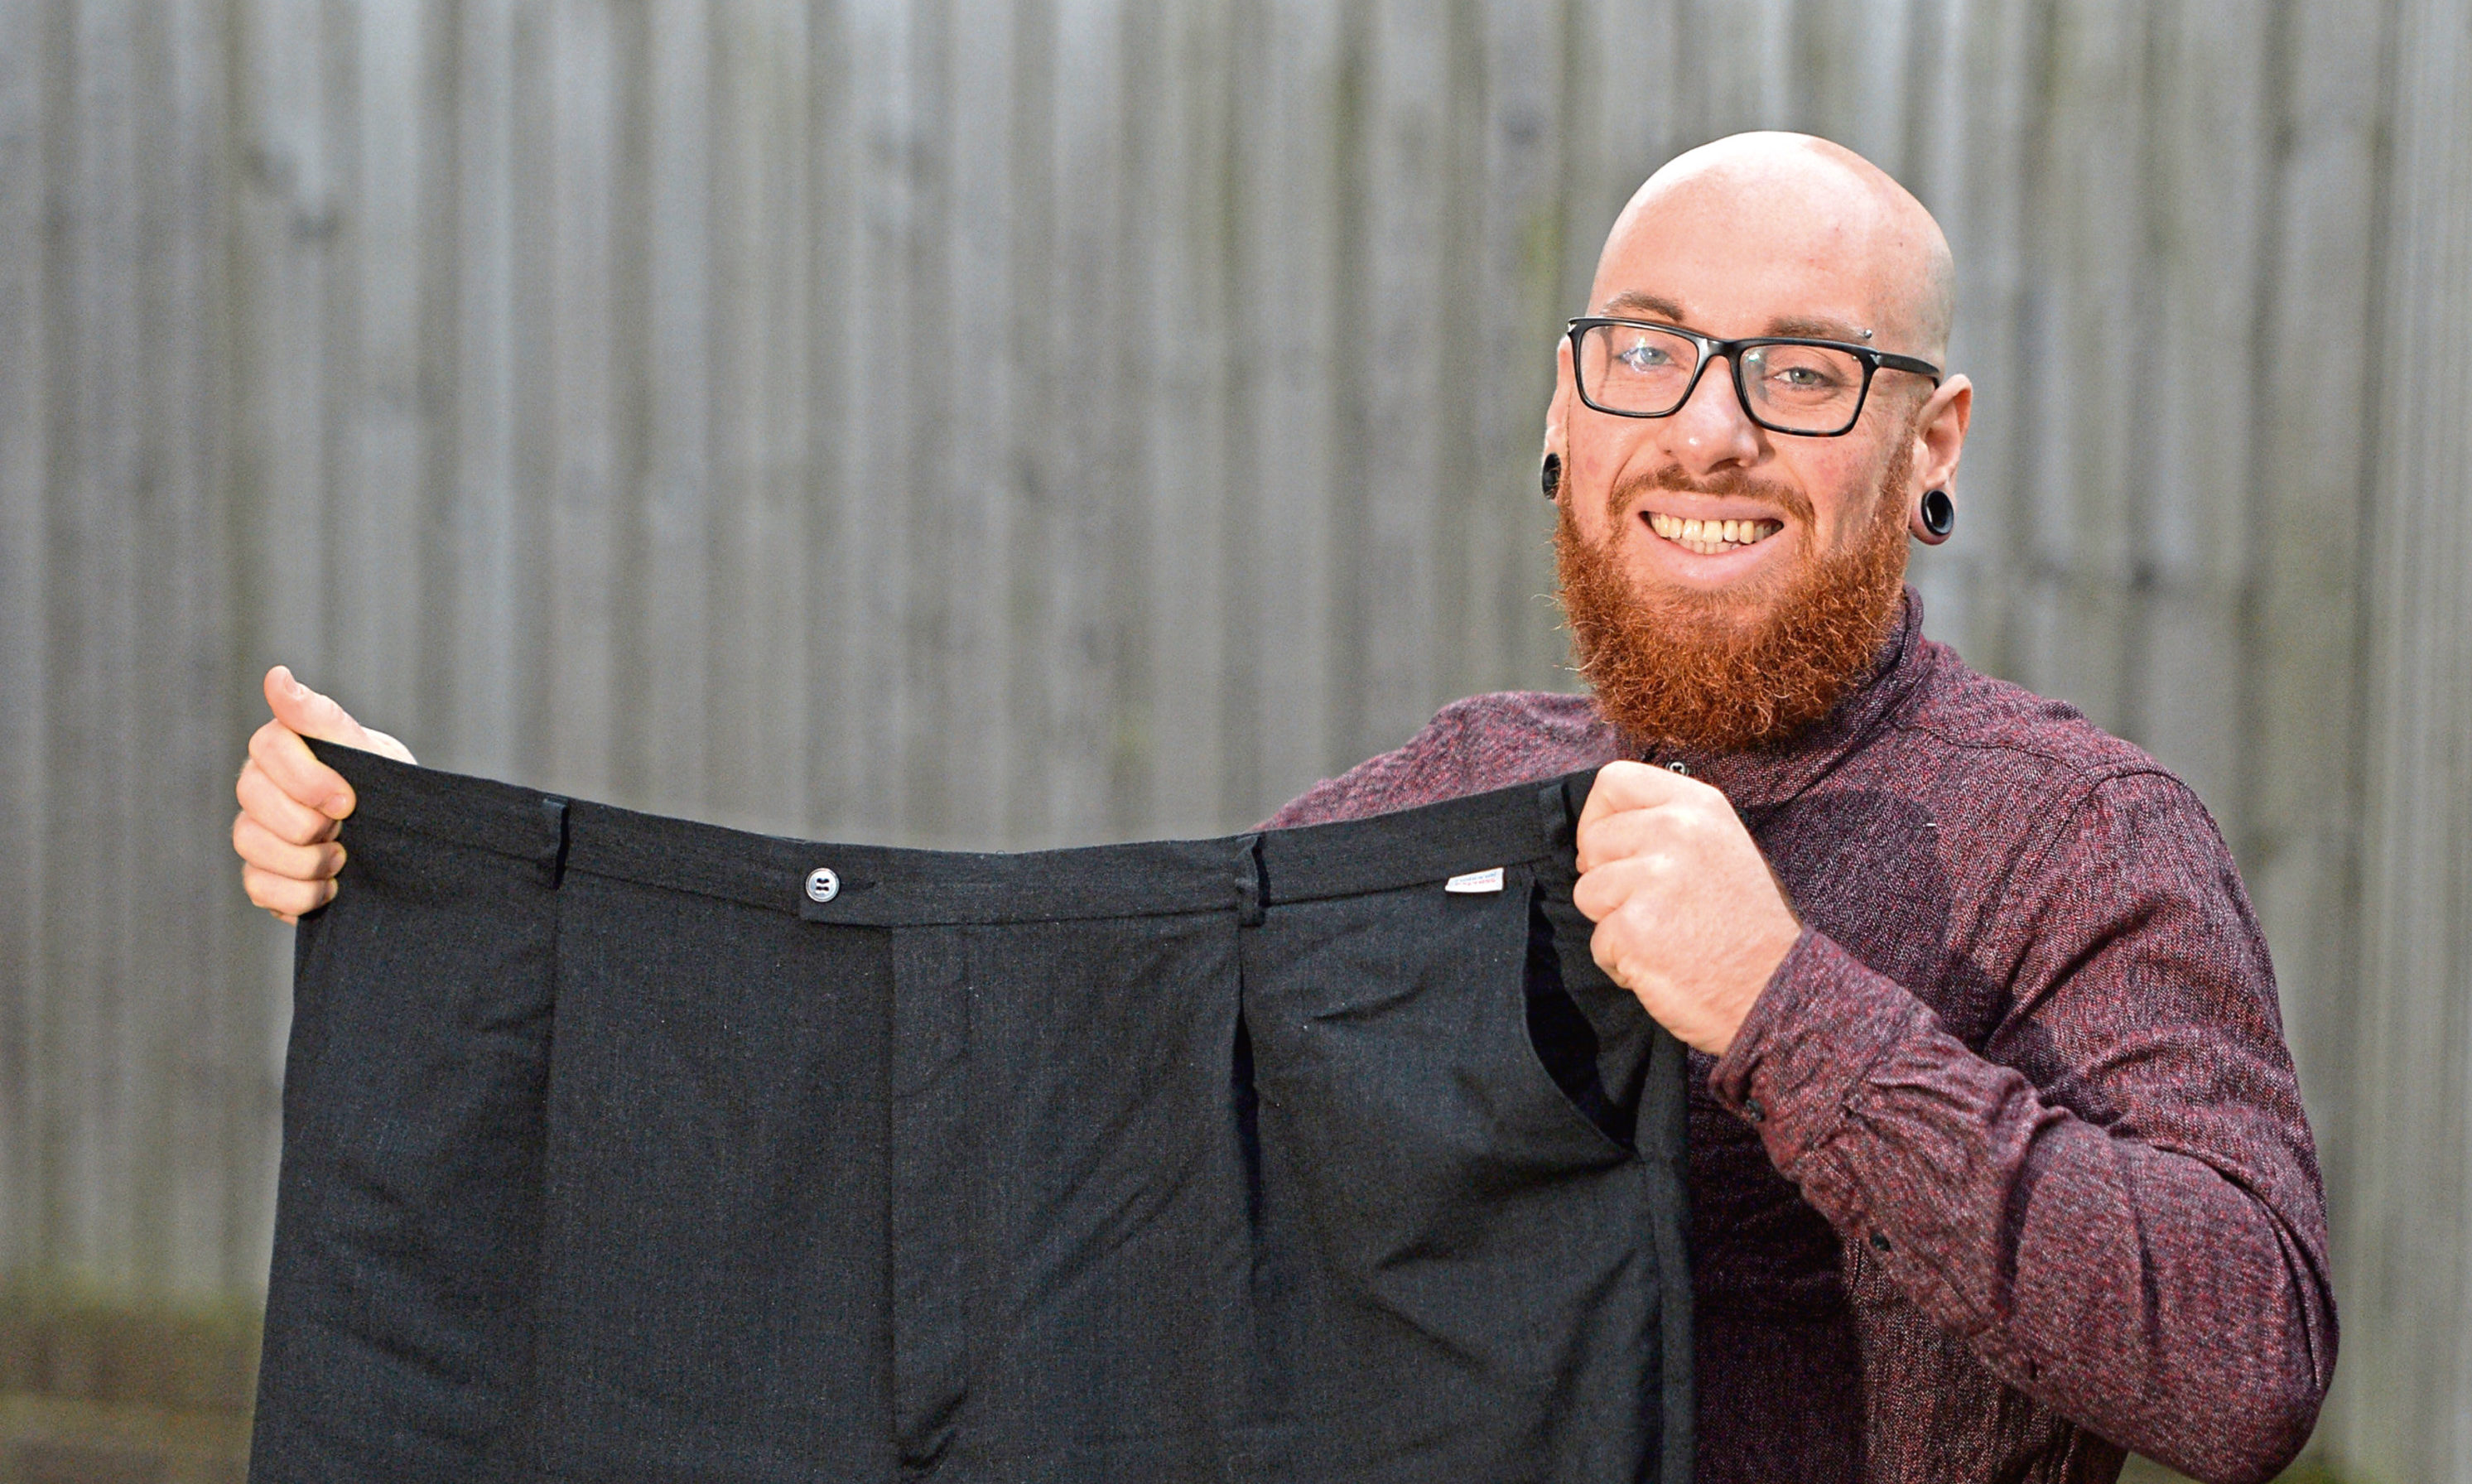 Iain McLeod, 32, from Dundee, has lost 12 stone 4 pounds.